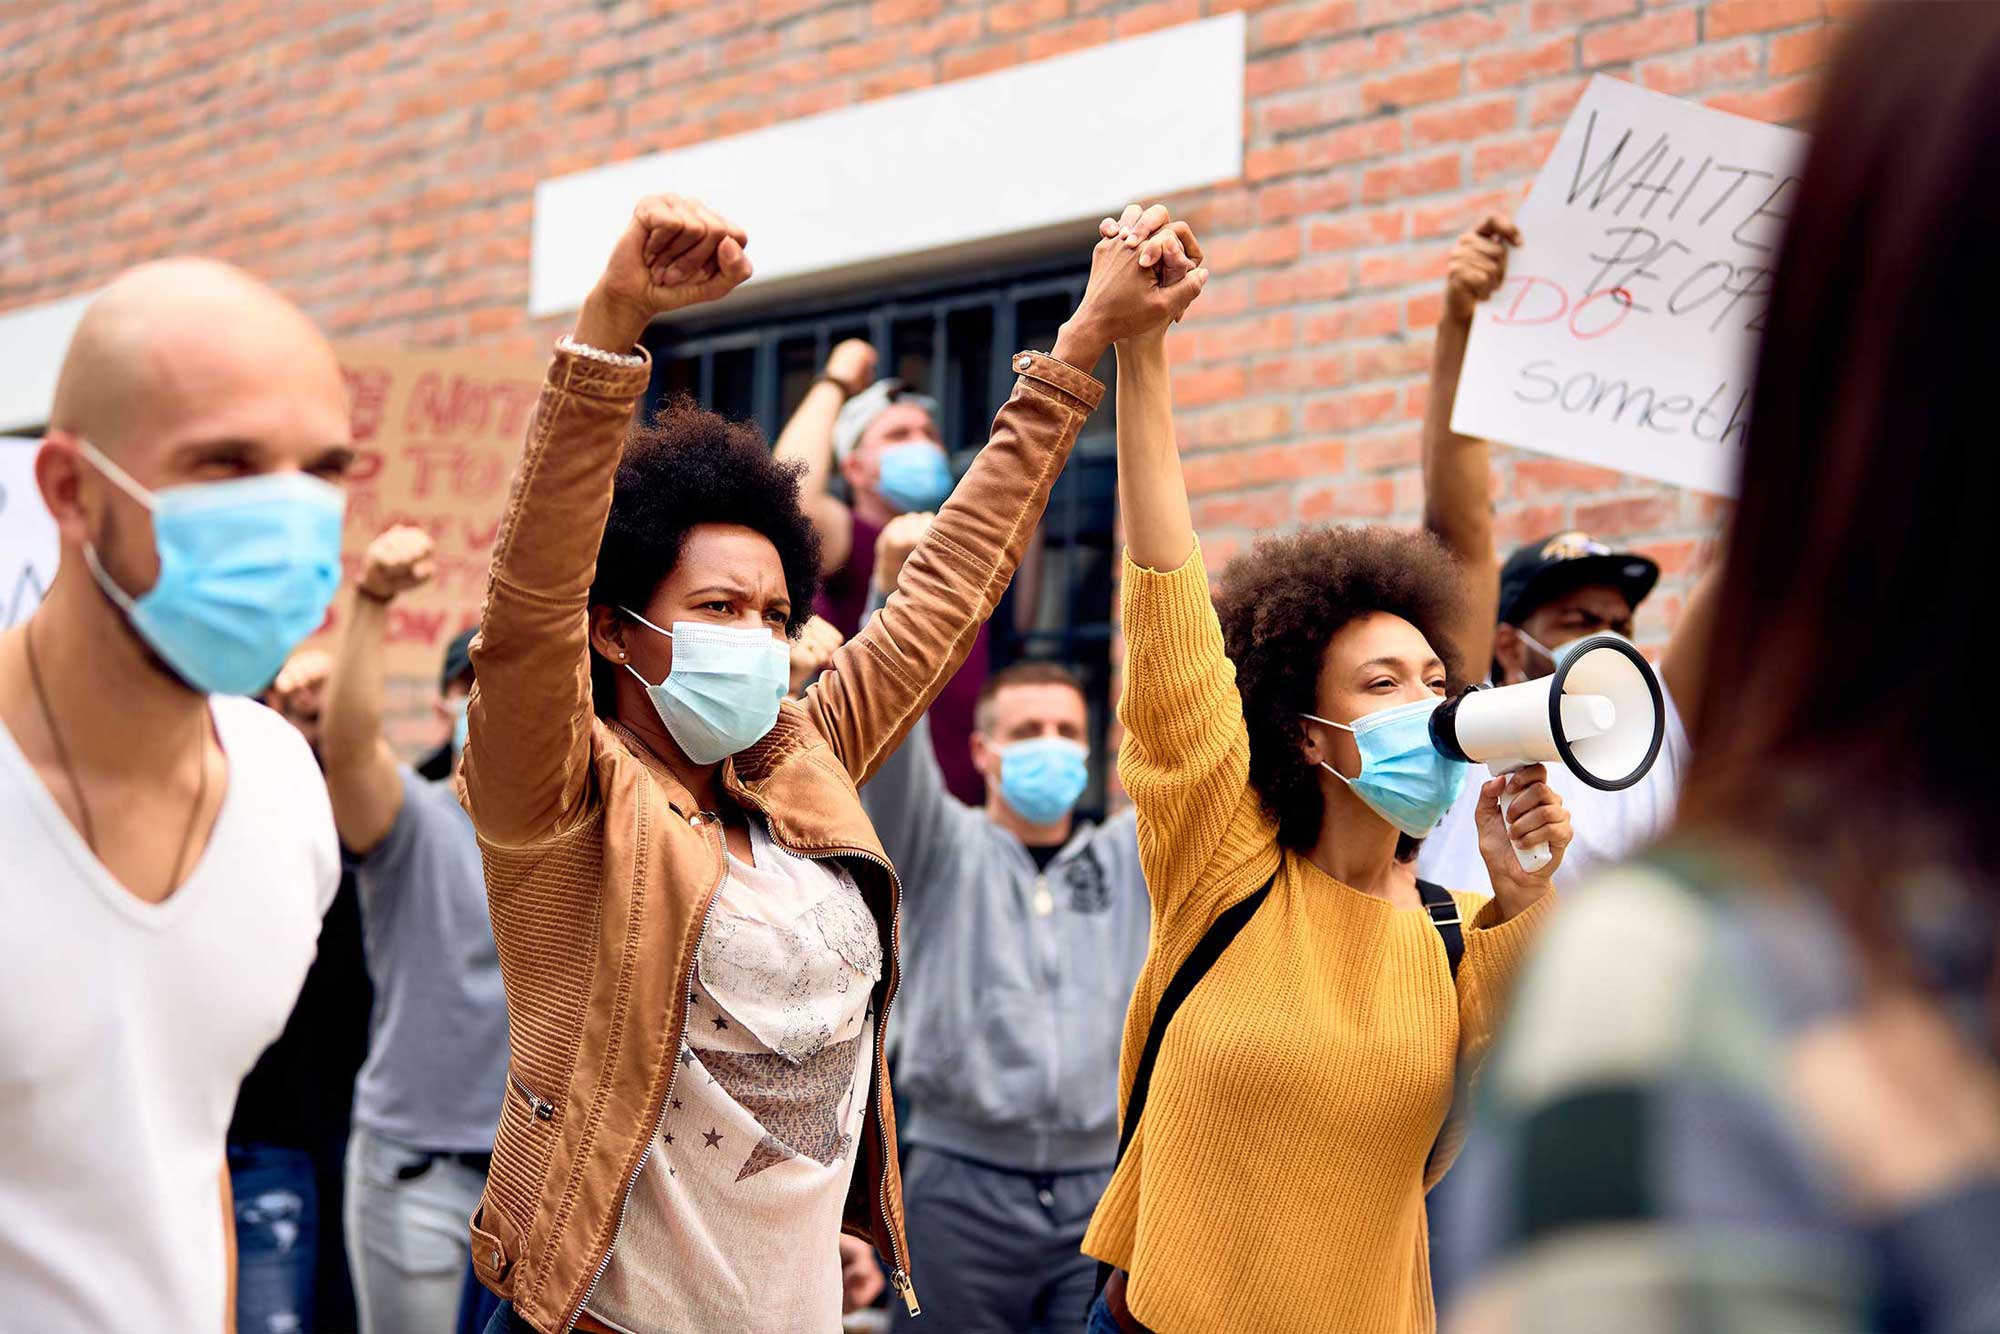 photo - People Wearing Protective Masks While Protesting at an Anti-Racism Demonstration